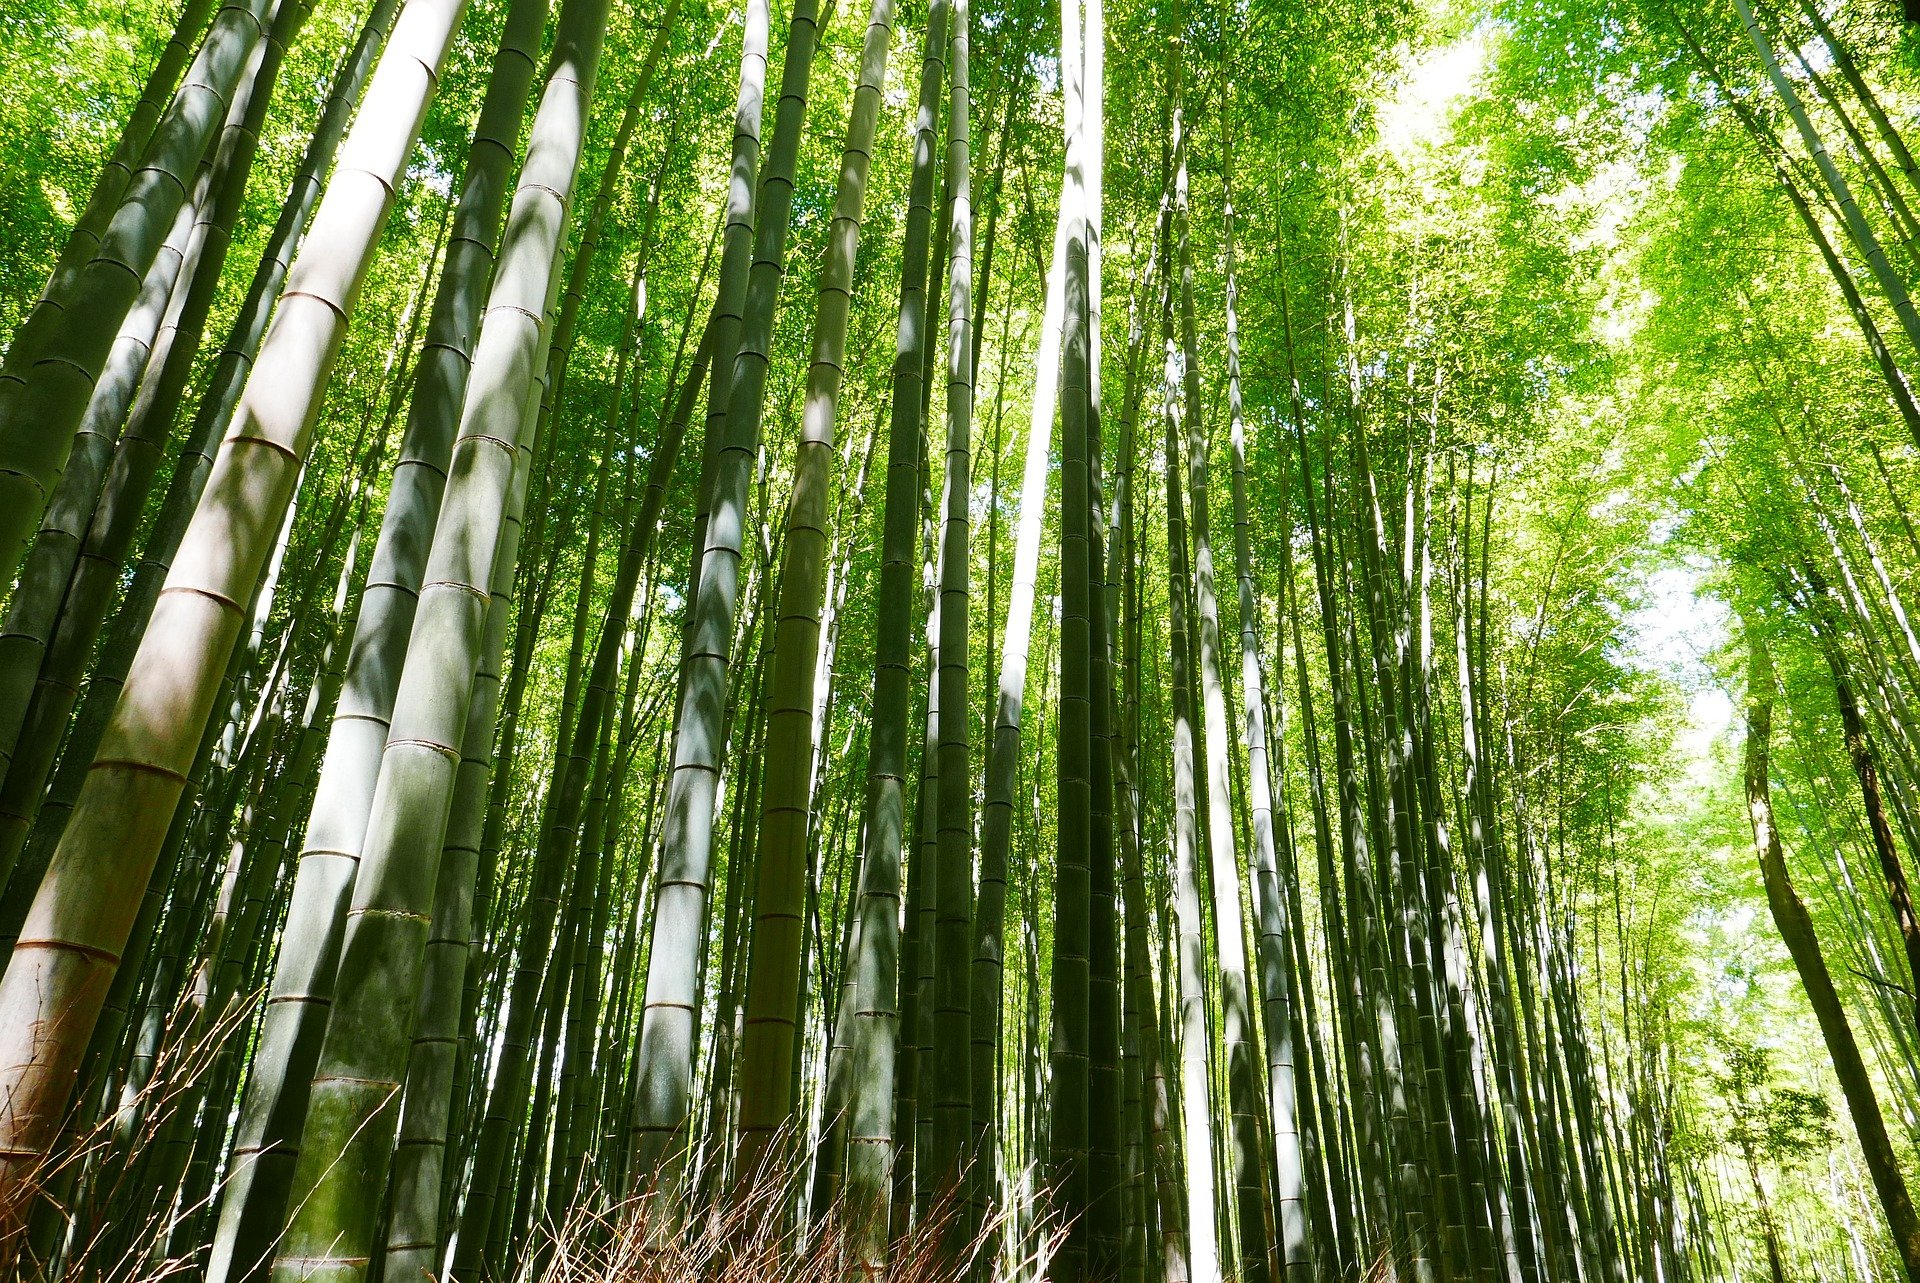 Bamboo is a sustainable building material